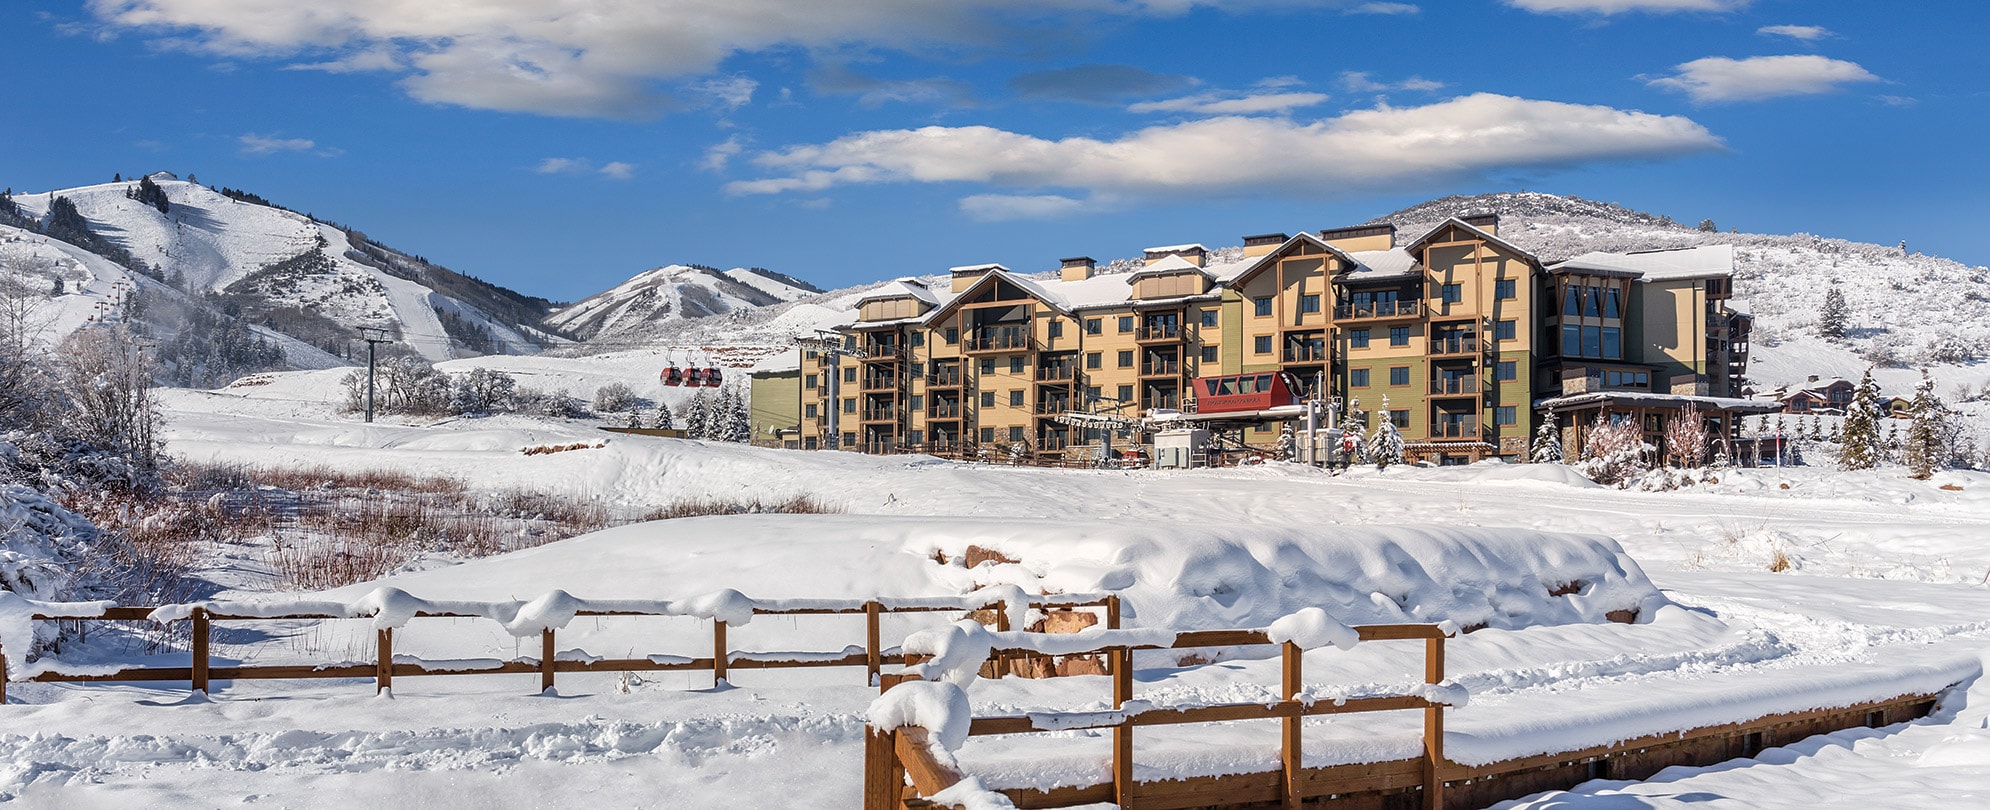 The outside of the Club Wyndham Park City resort covered in snow.  